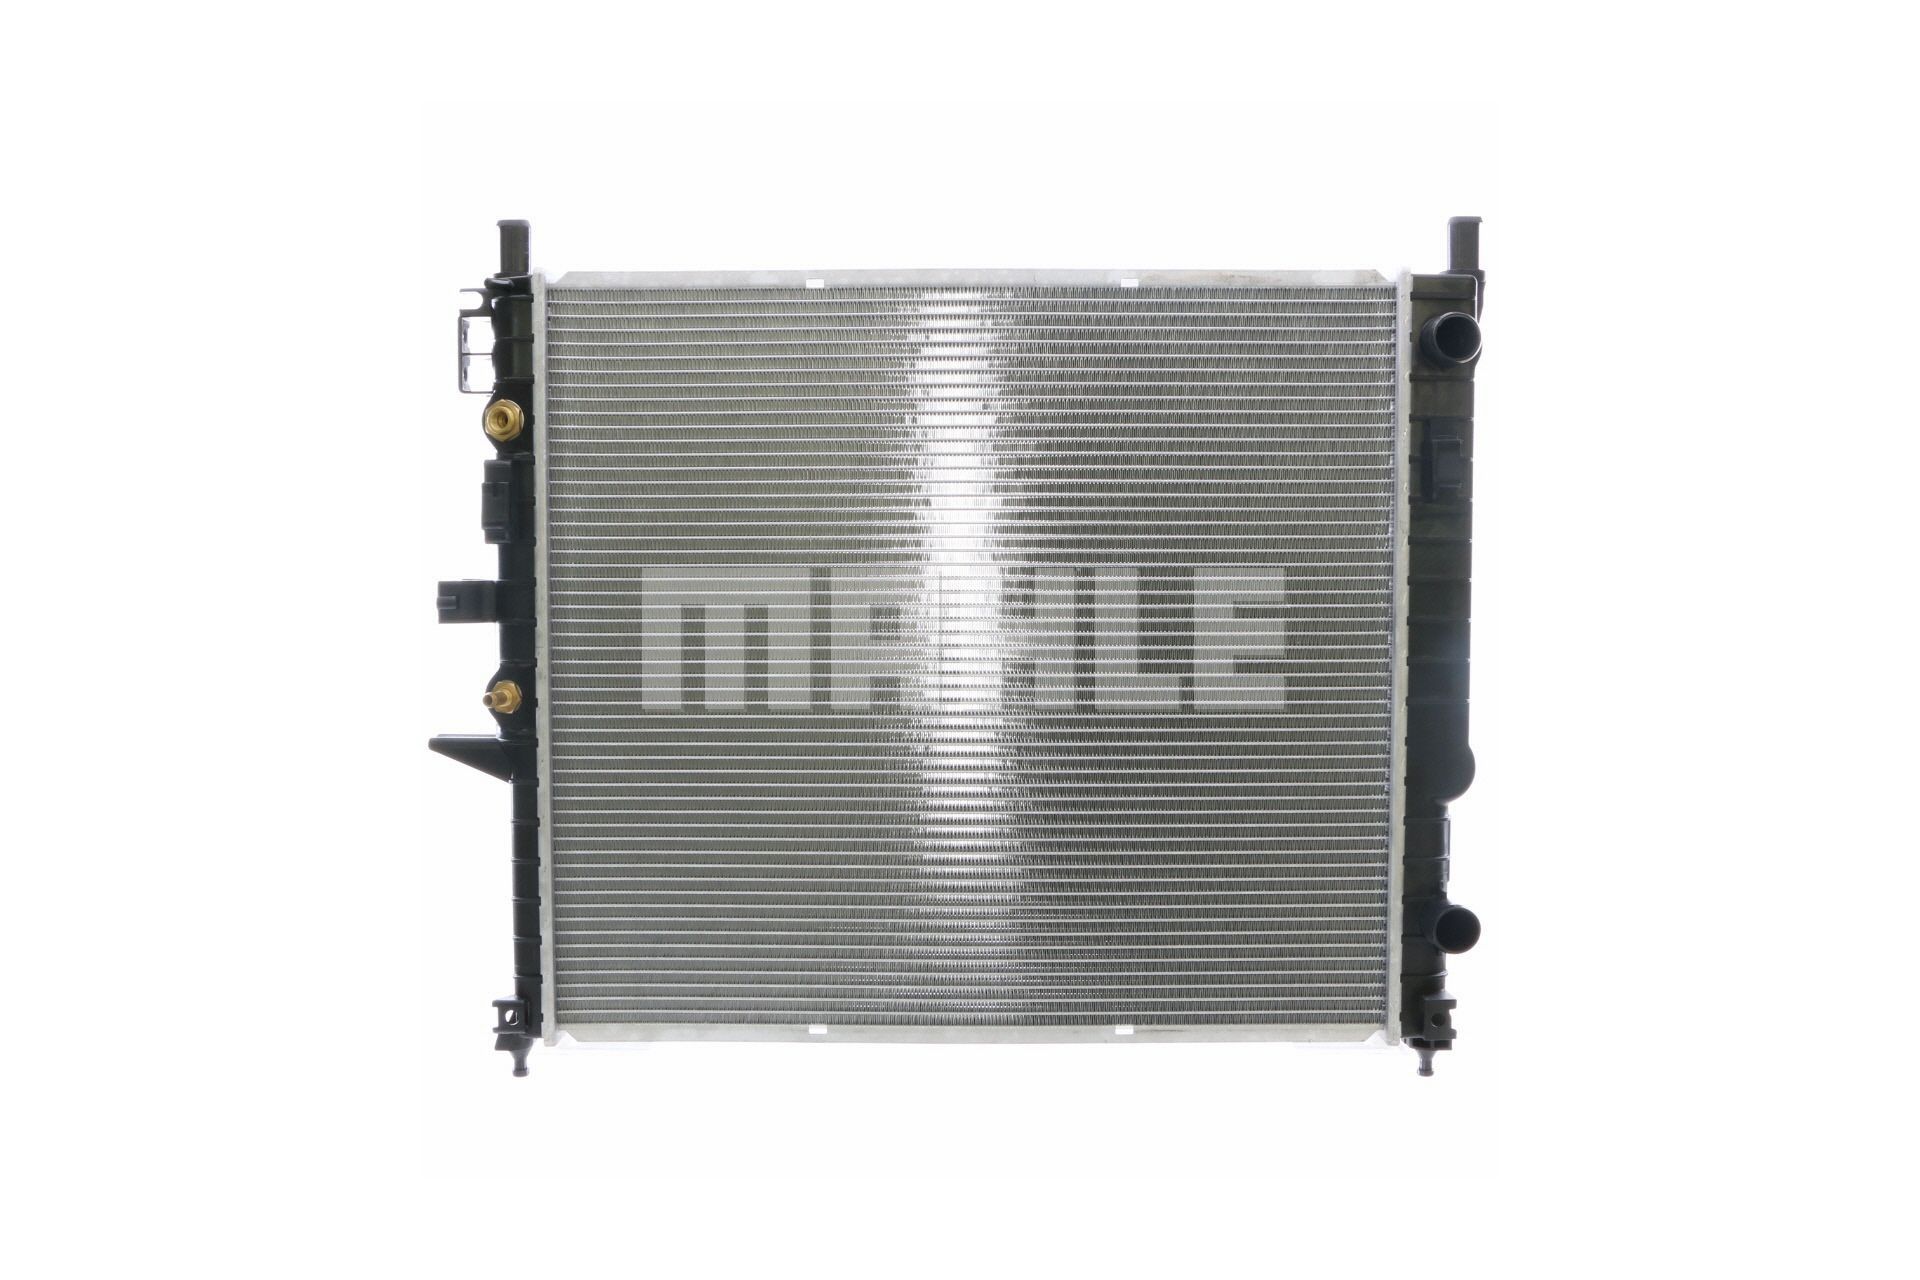 MAHLE ORIGINAL CR 554 000S Engine radiator for vehicles with/without air conditioning, 609 x 555 x 40 mm, Automatic Transmission, Manual Transmission, Brazed cooling fins